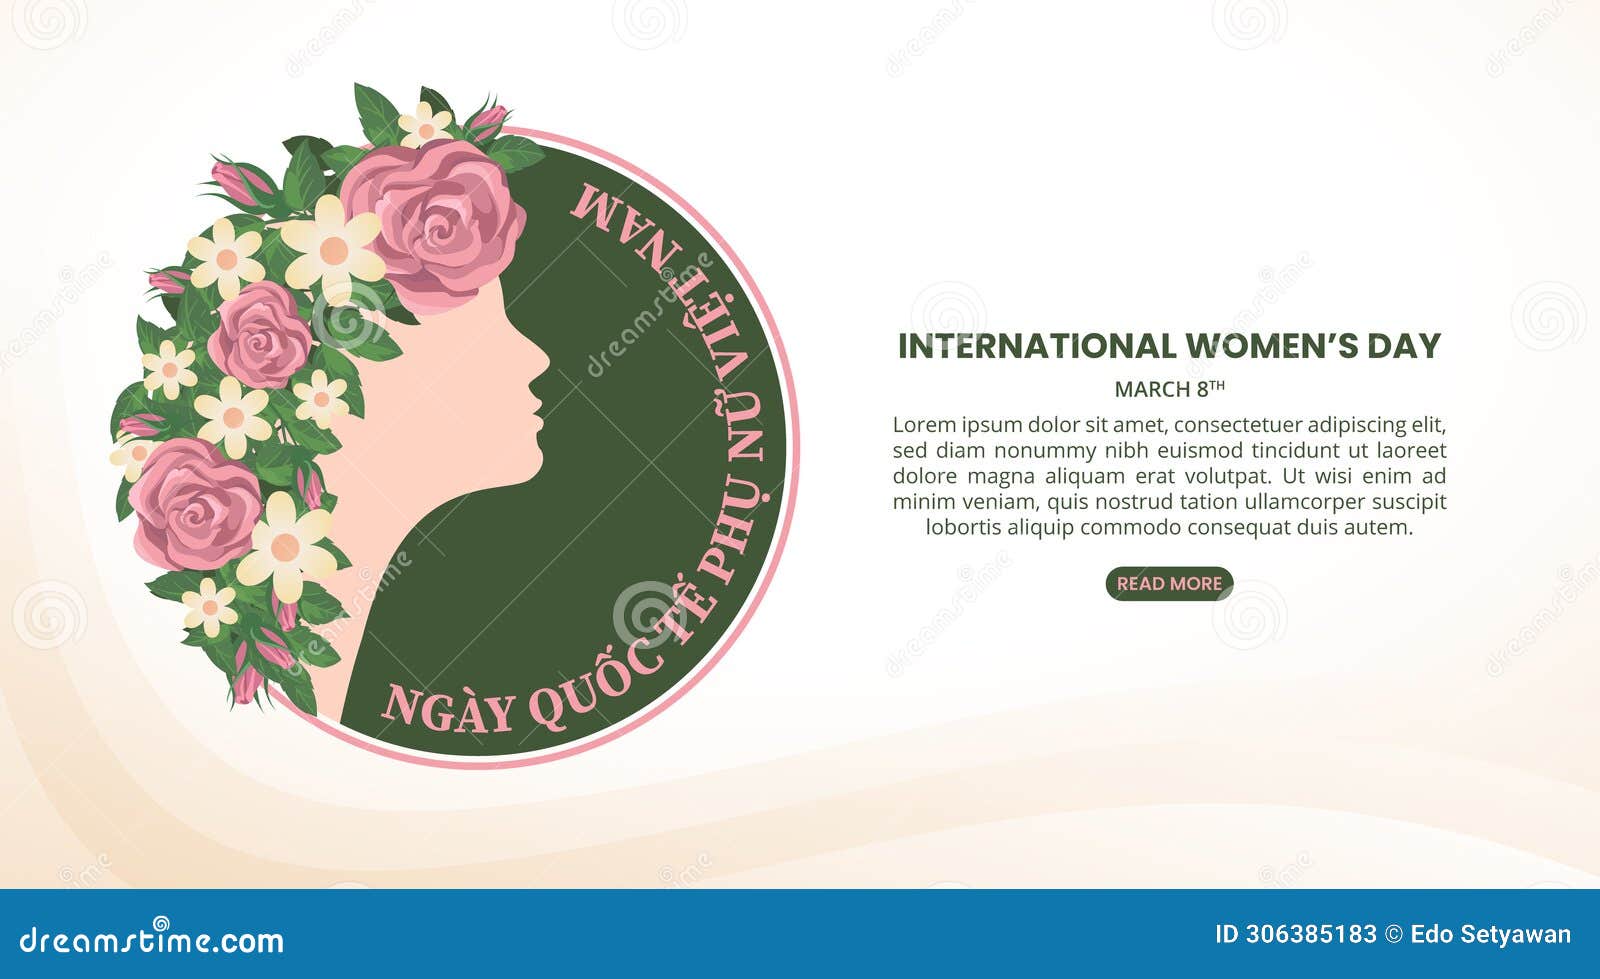 ngay quoc te phu nu or international women's day background with a woman and flowers